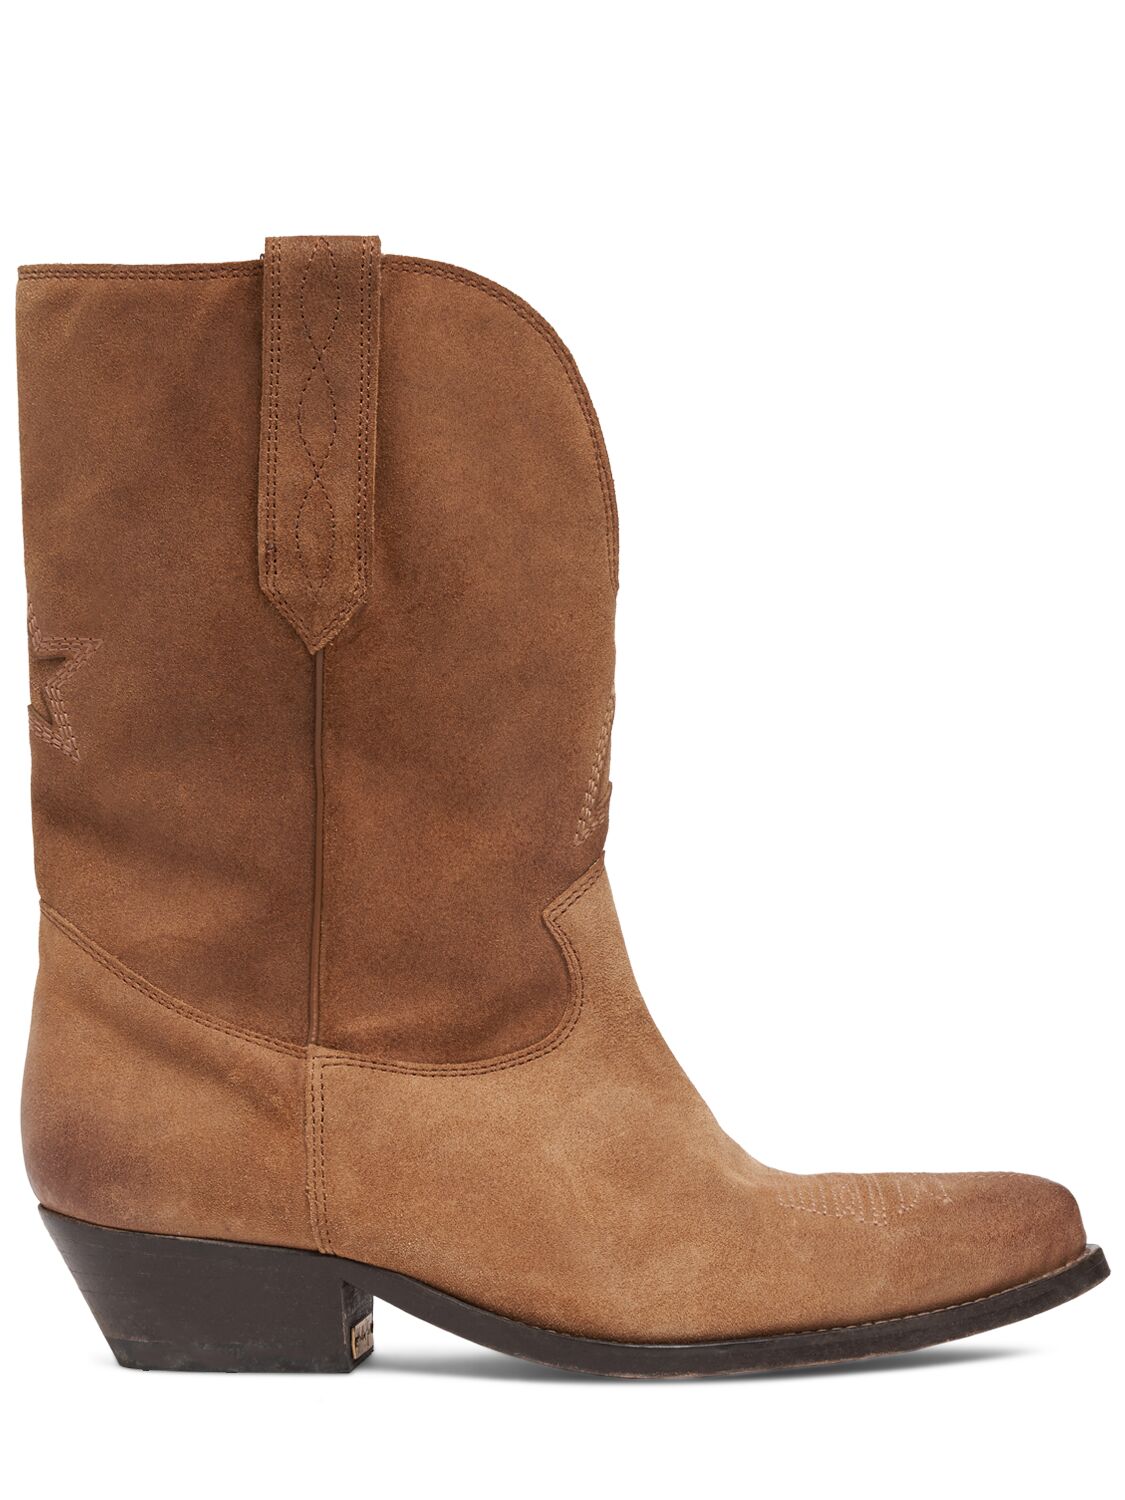 Golden Goose 45mm Wish Star Suede Ankle Boots In Cognac